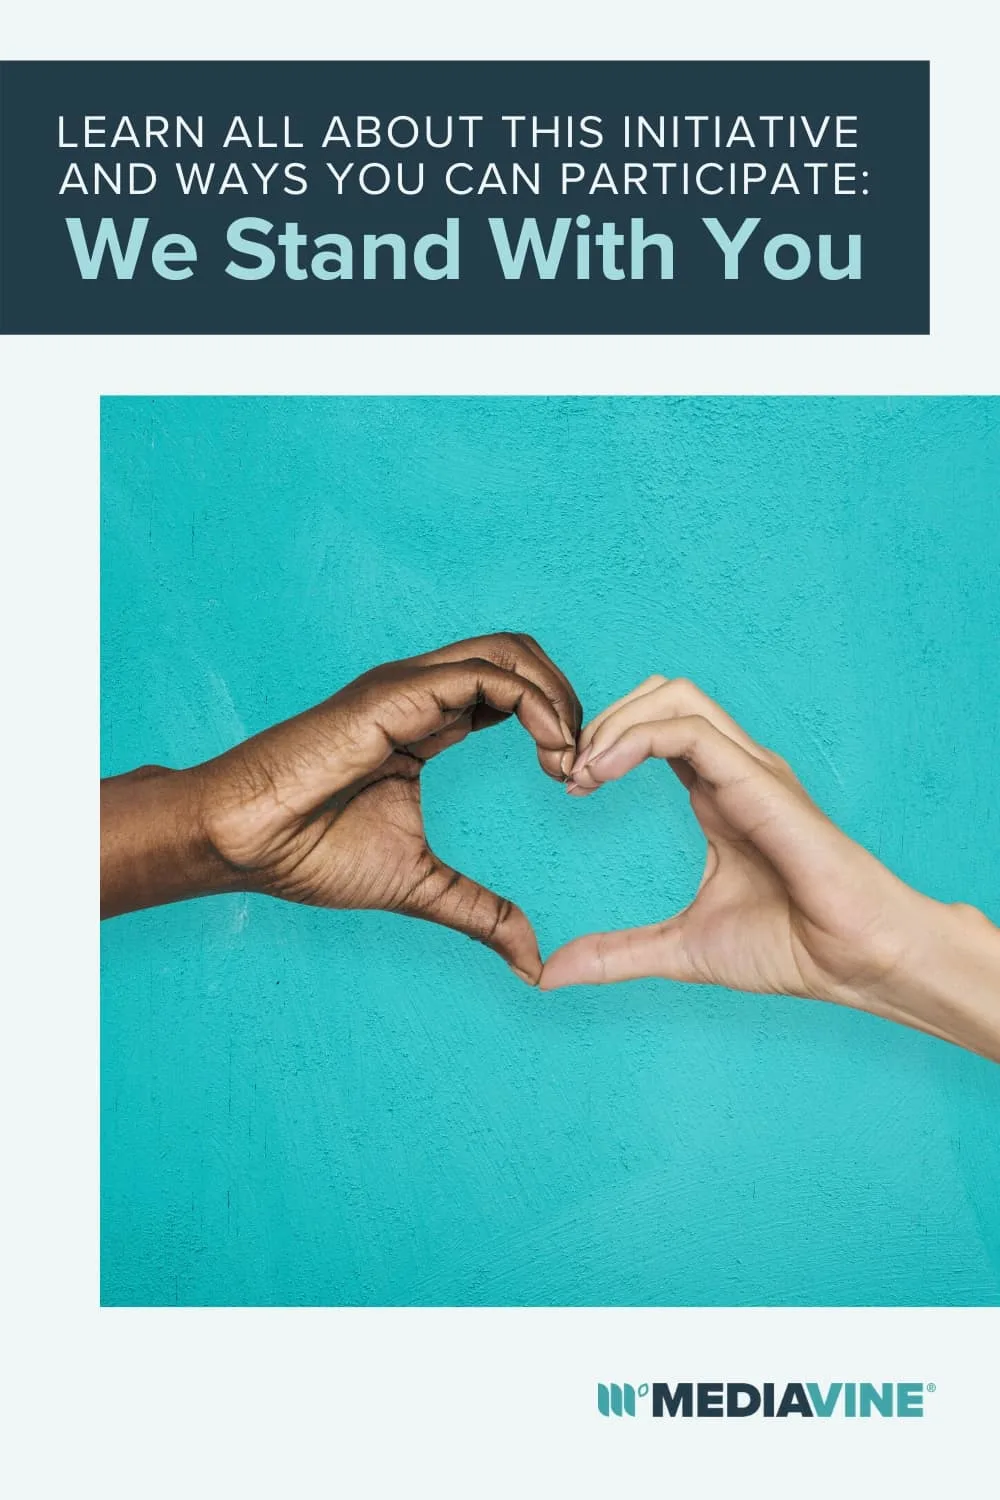 Mediavine Pinterest image - We Stand With You: Learn all about this initiative and ways you can participate